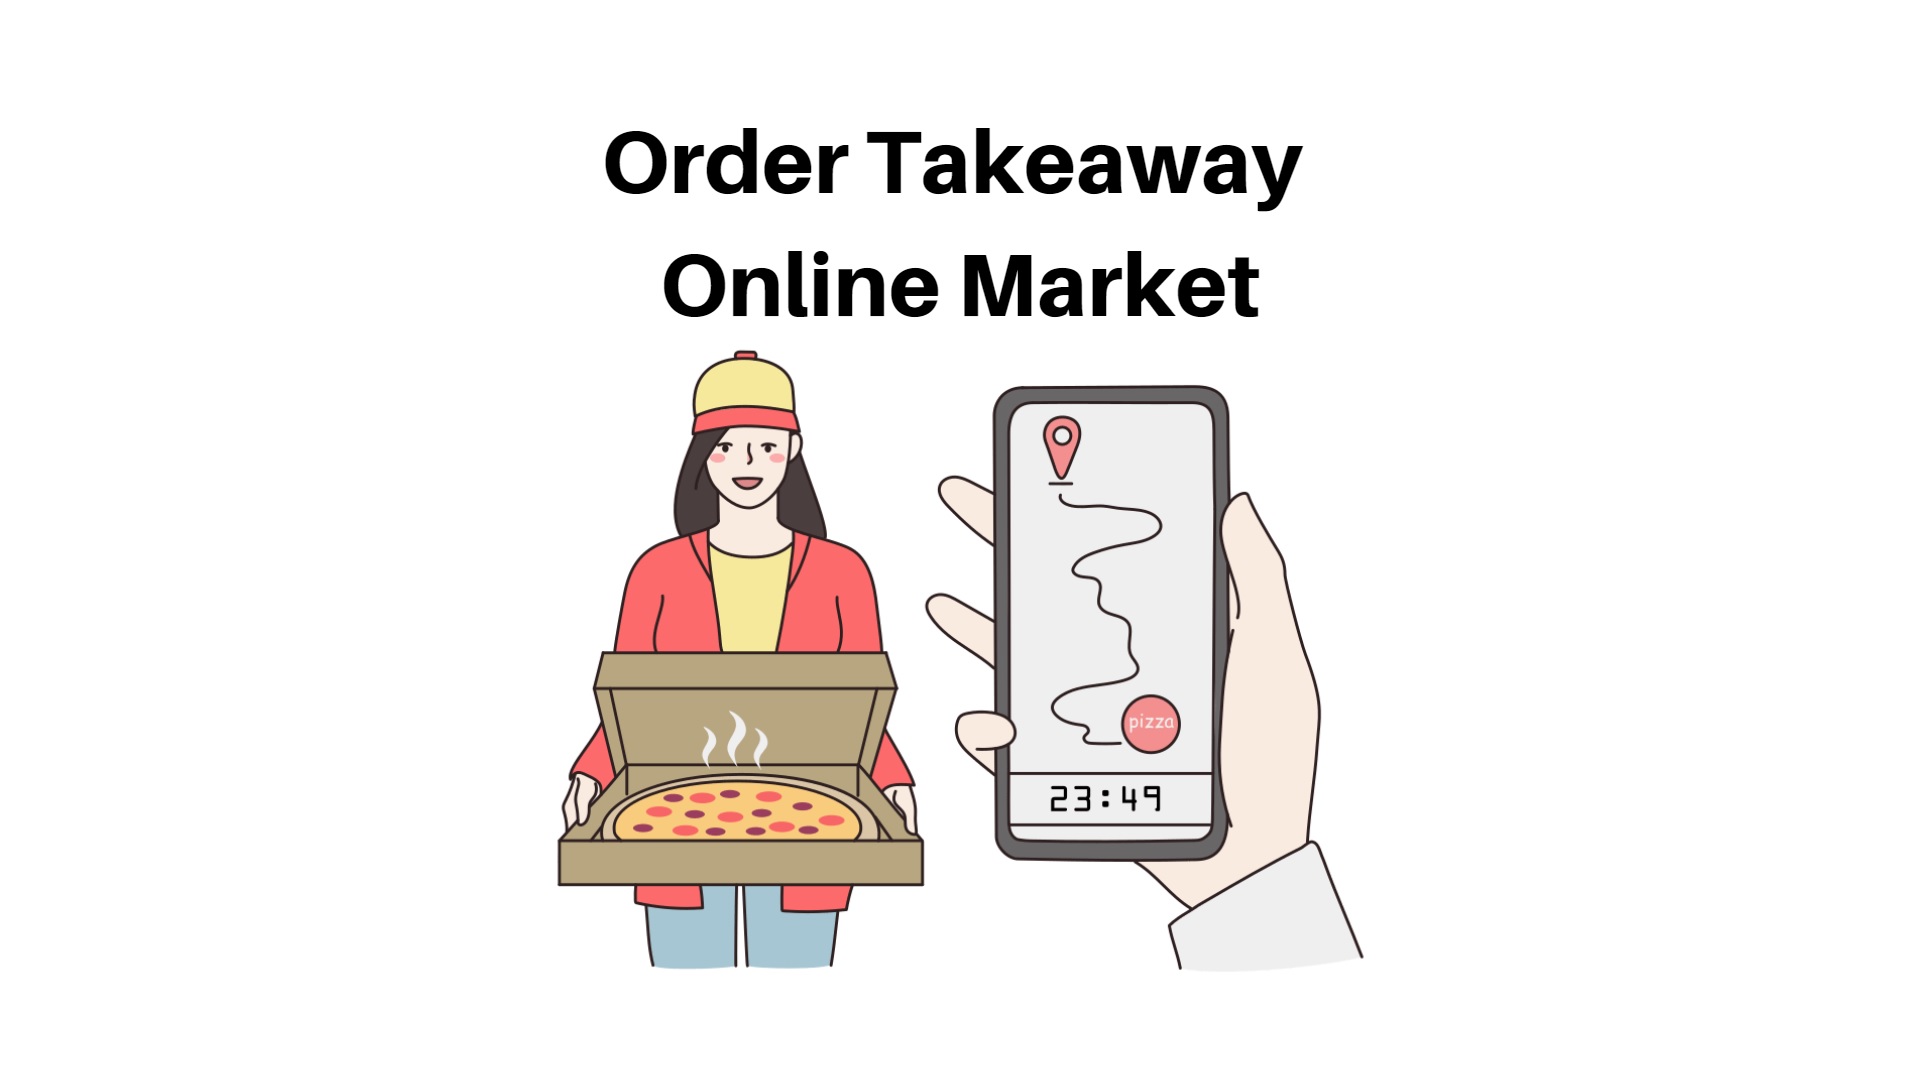 Order Takeaway Online Market to Reach USD 22.5 Billion by 2032, Says Market.us Research Study